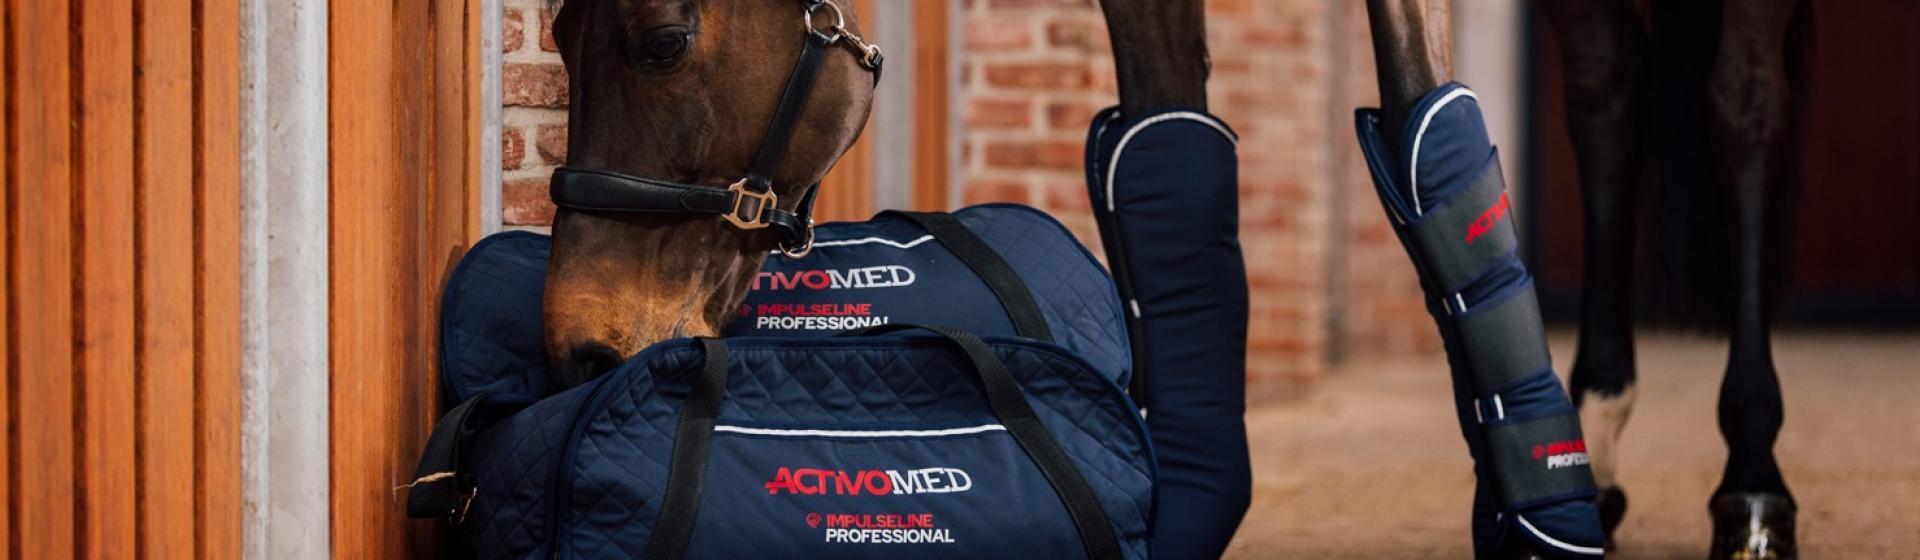 New Activomed Professional horse rug